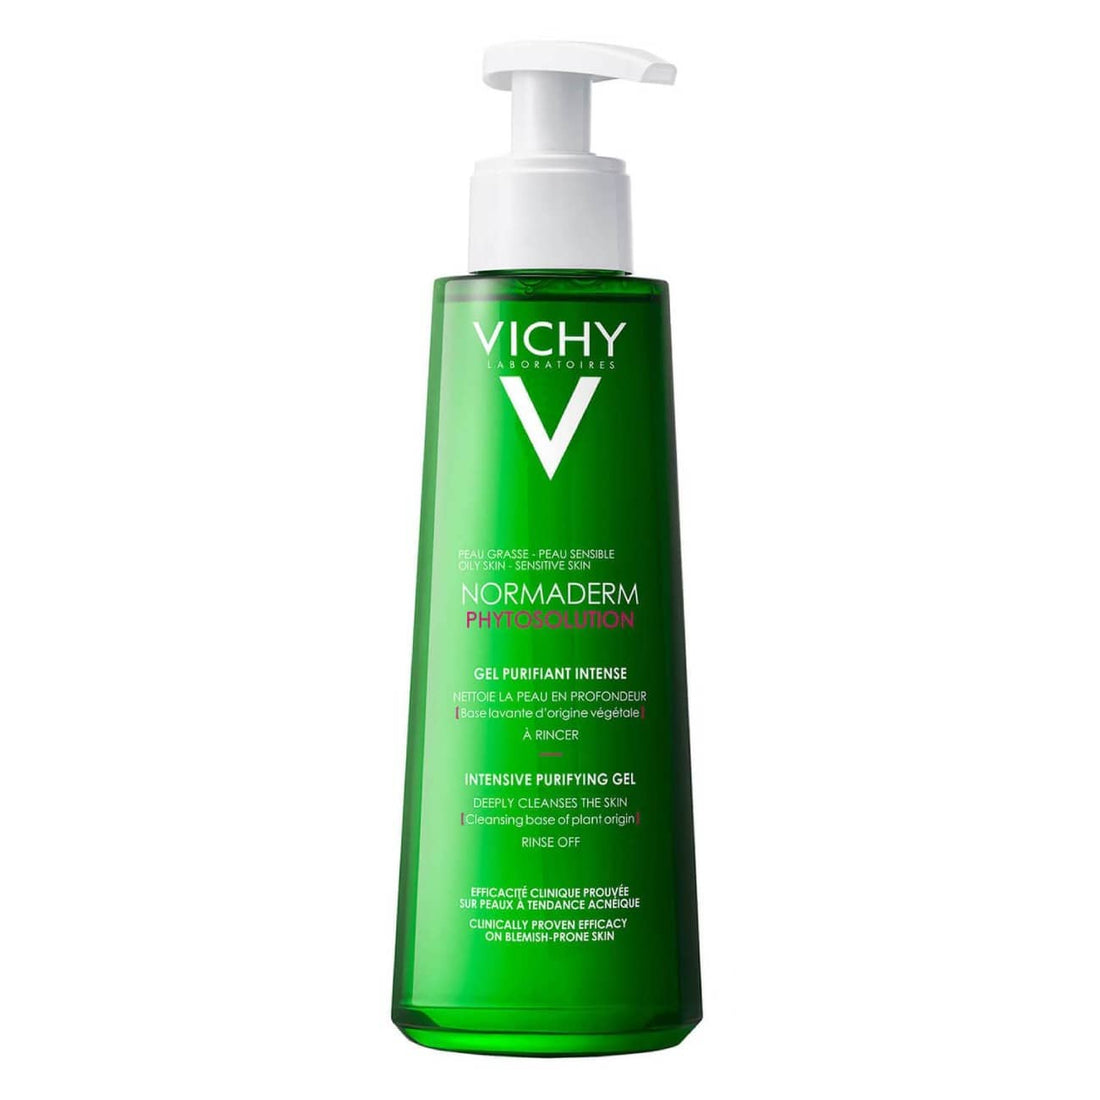 Vichy Normaderm PhytoSolution Intensive Purifying Gel-400ml